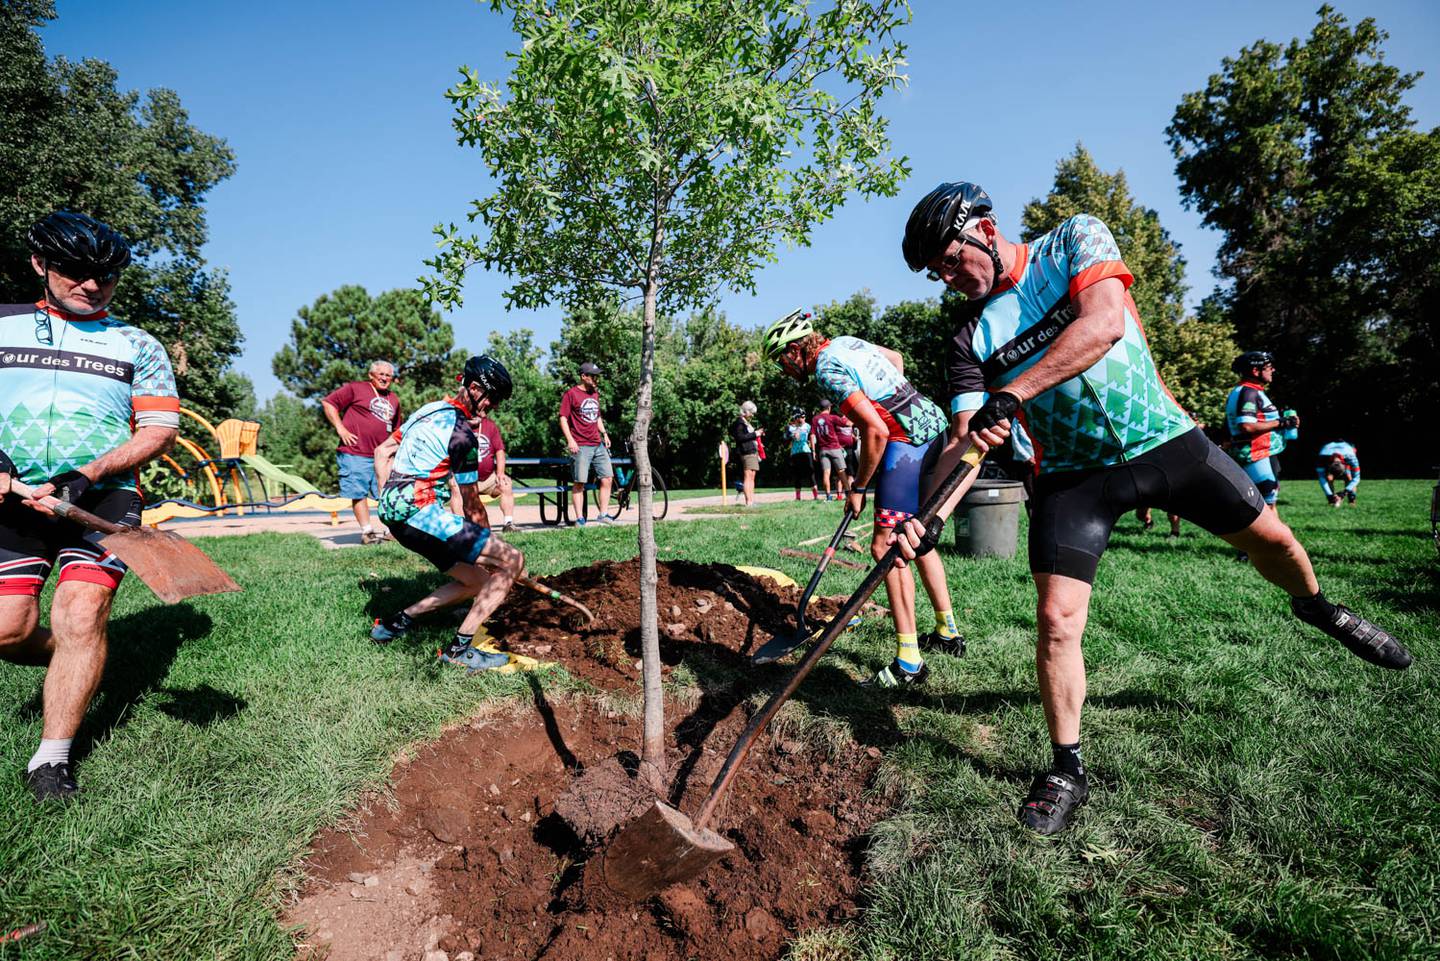 Cyclists participating in the TREE Fund's Tour des Trees will make a one-hour stop in Newton at 10 a.m. Sept. 5 at the Newton Arboretum & Botanical Gardens.